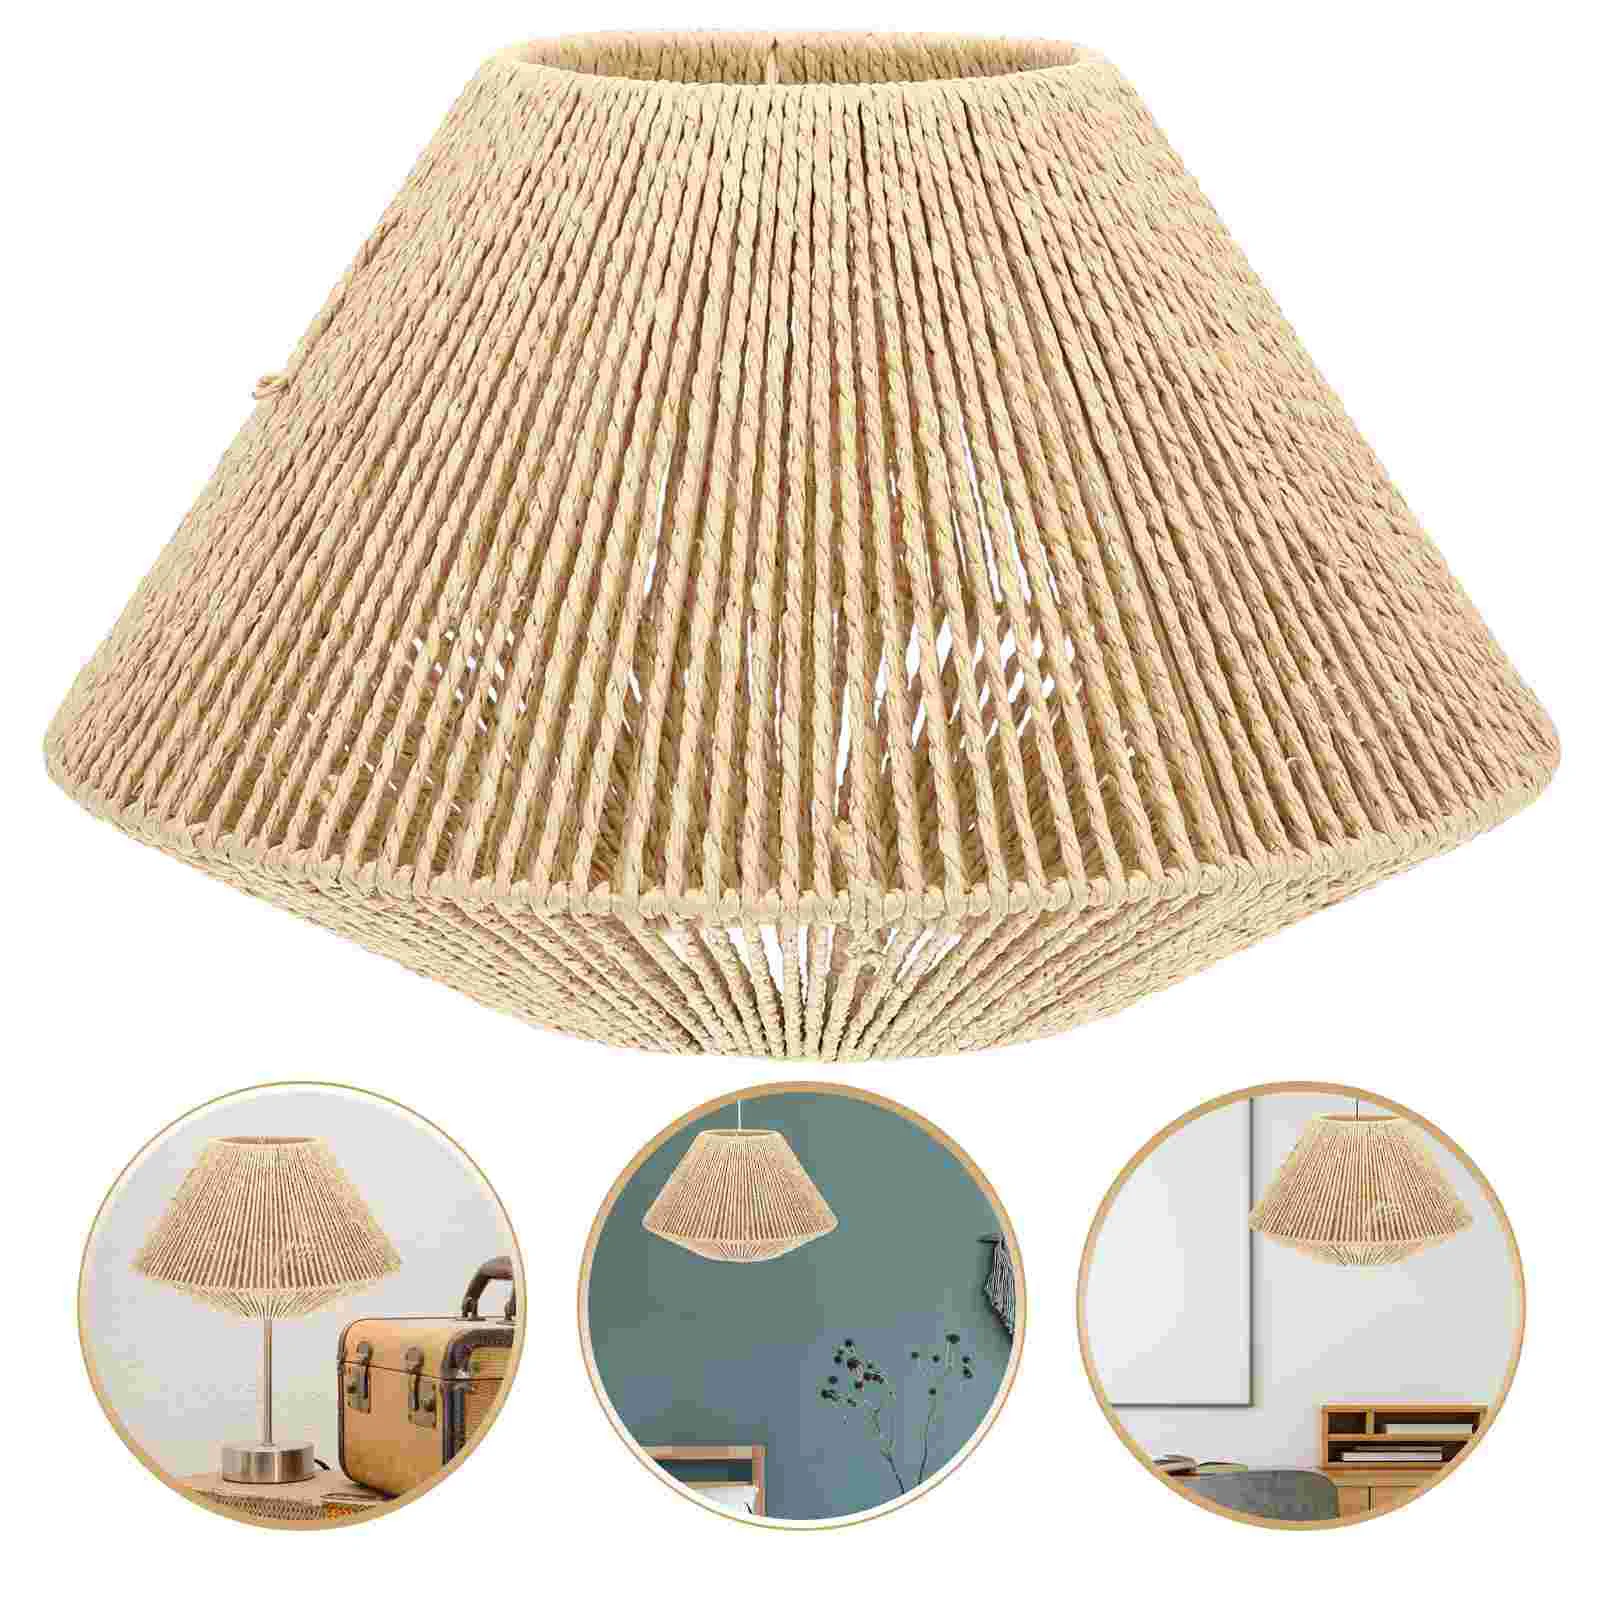 

Woven Light Bulbss Lampshade Rattan Weave Chandelier Lampcover Hanging Lamp Ceiling Lamps Living Room Bedroom Home